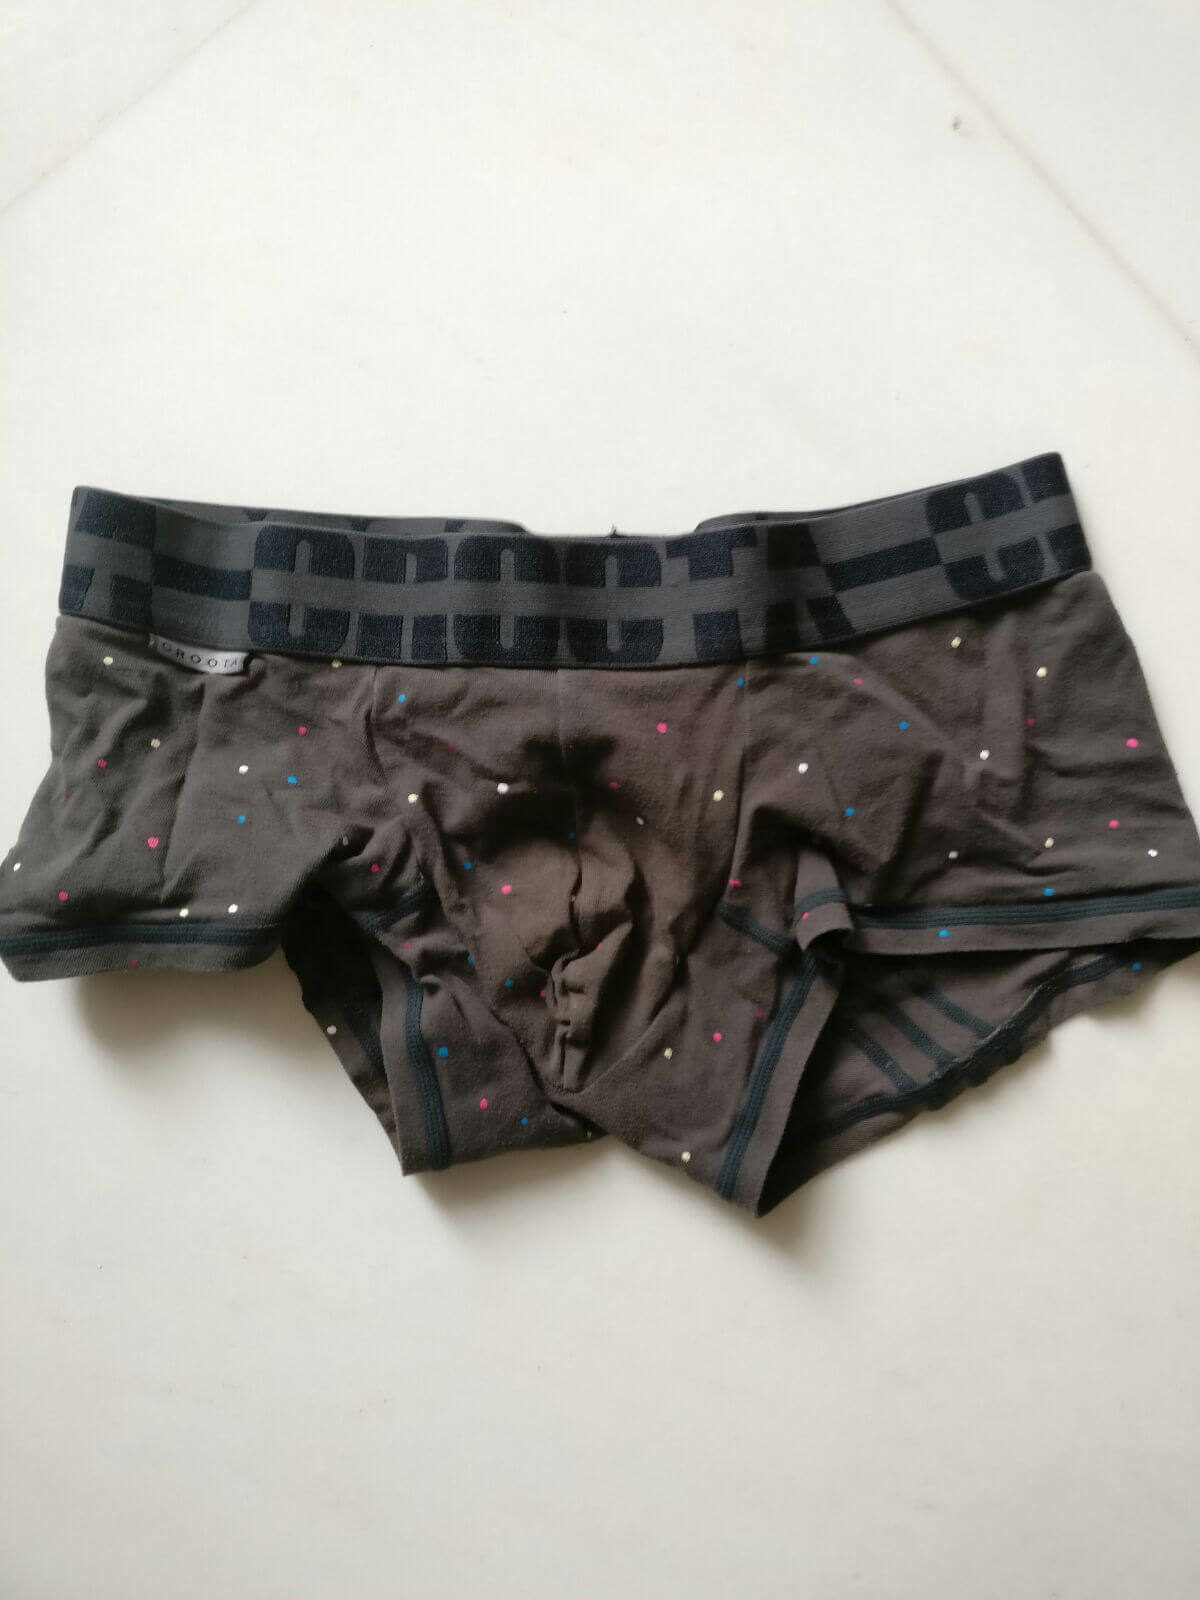 2nd Hand Underwear for sale. - Services, Biz & Useful Web Links - Blowing  Wind Singapore Gay Forum